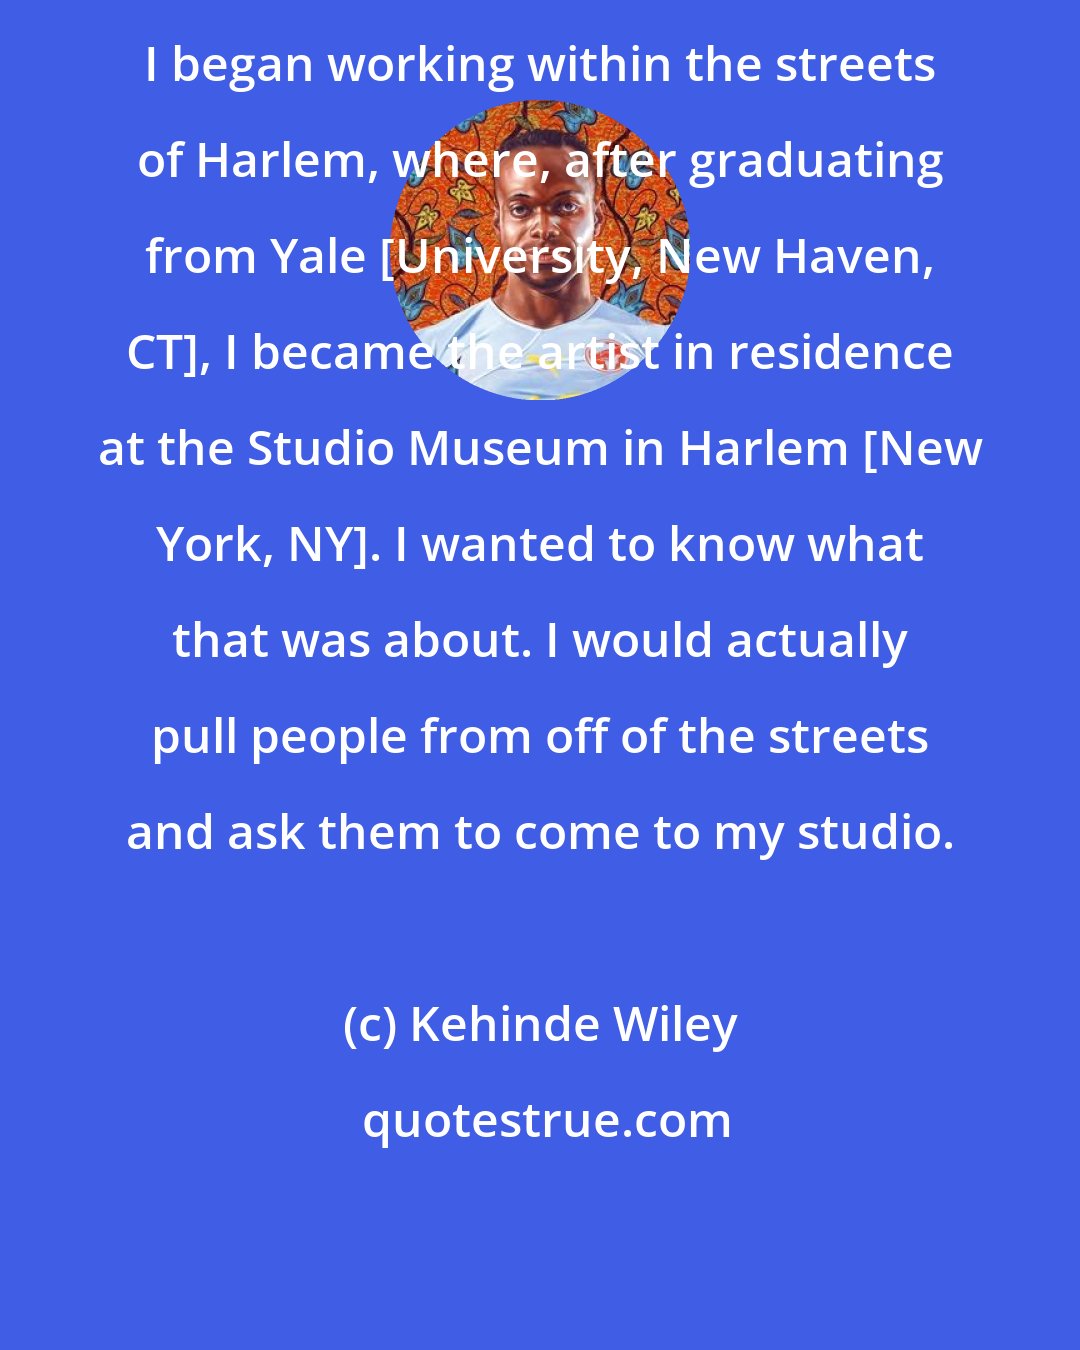 Kehinde Wiley: I began working within the streets of Harlem, where, after graduating from Yale [University, New Haven, CT], I became the artist in residence at the Studio Museum in Harlem [New York, NY]. I wanted to know what that was about. I would actually pull people from off of the streets and ask them to come to my studio.